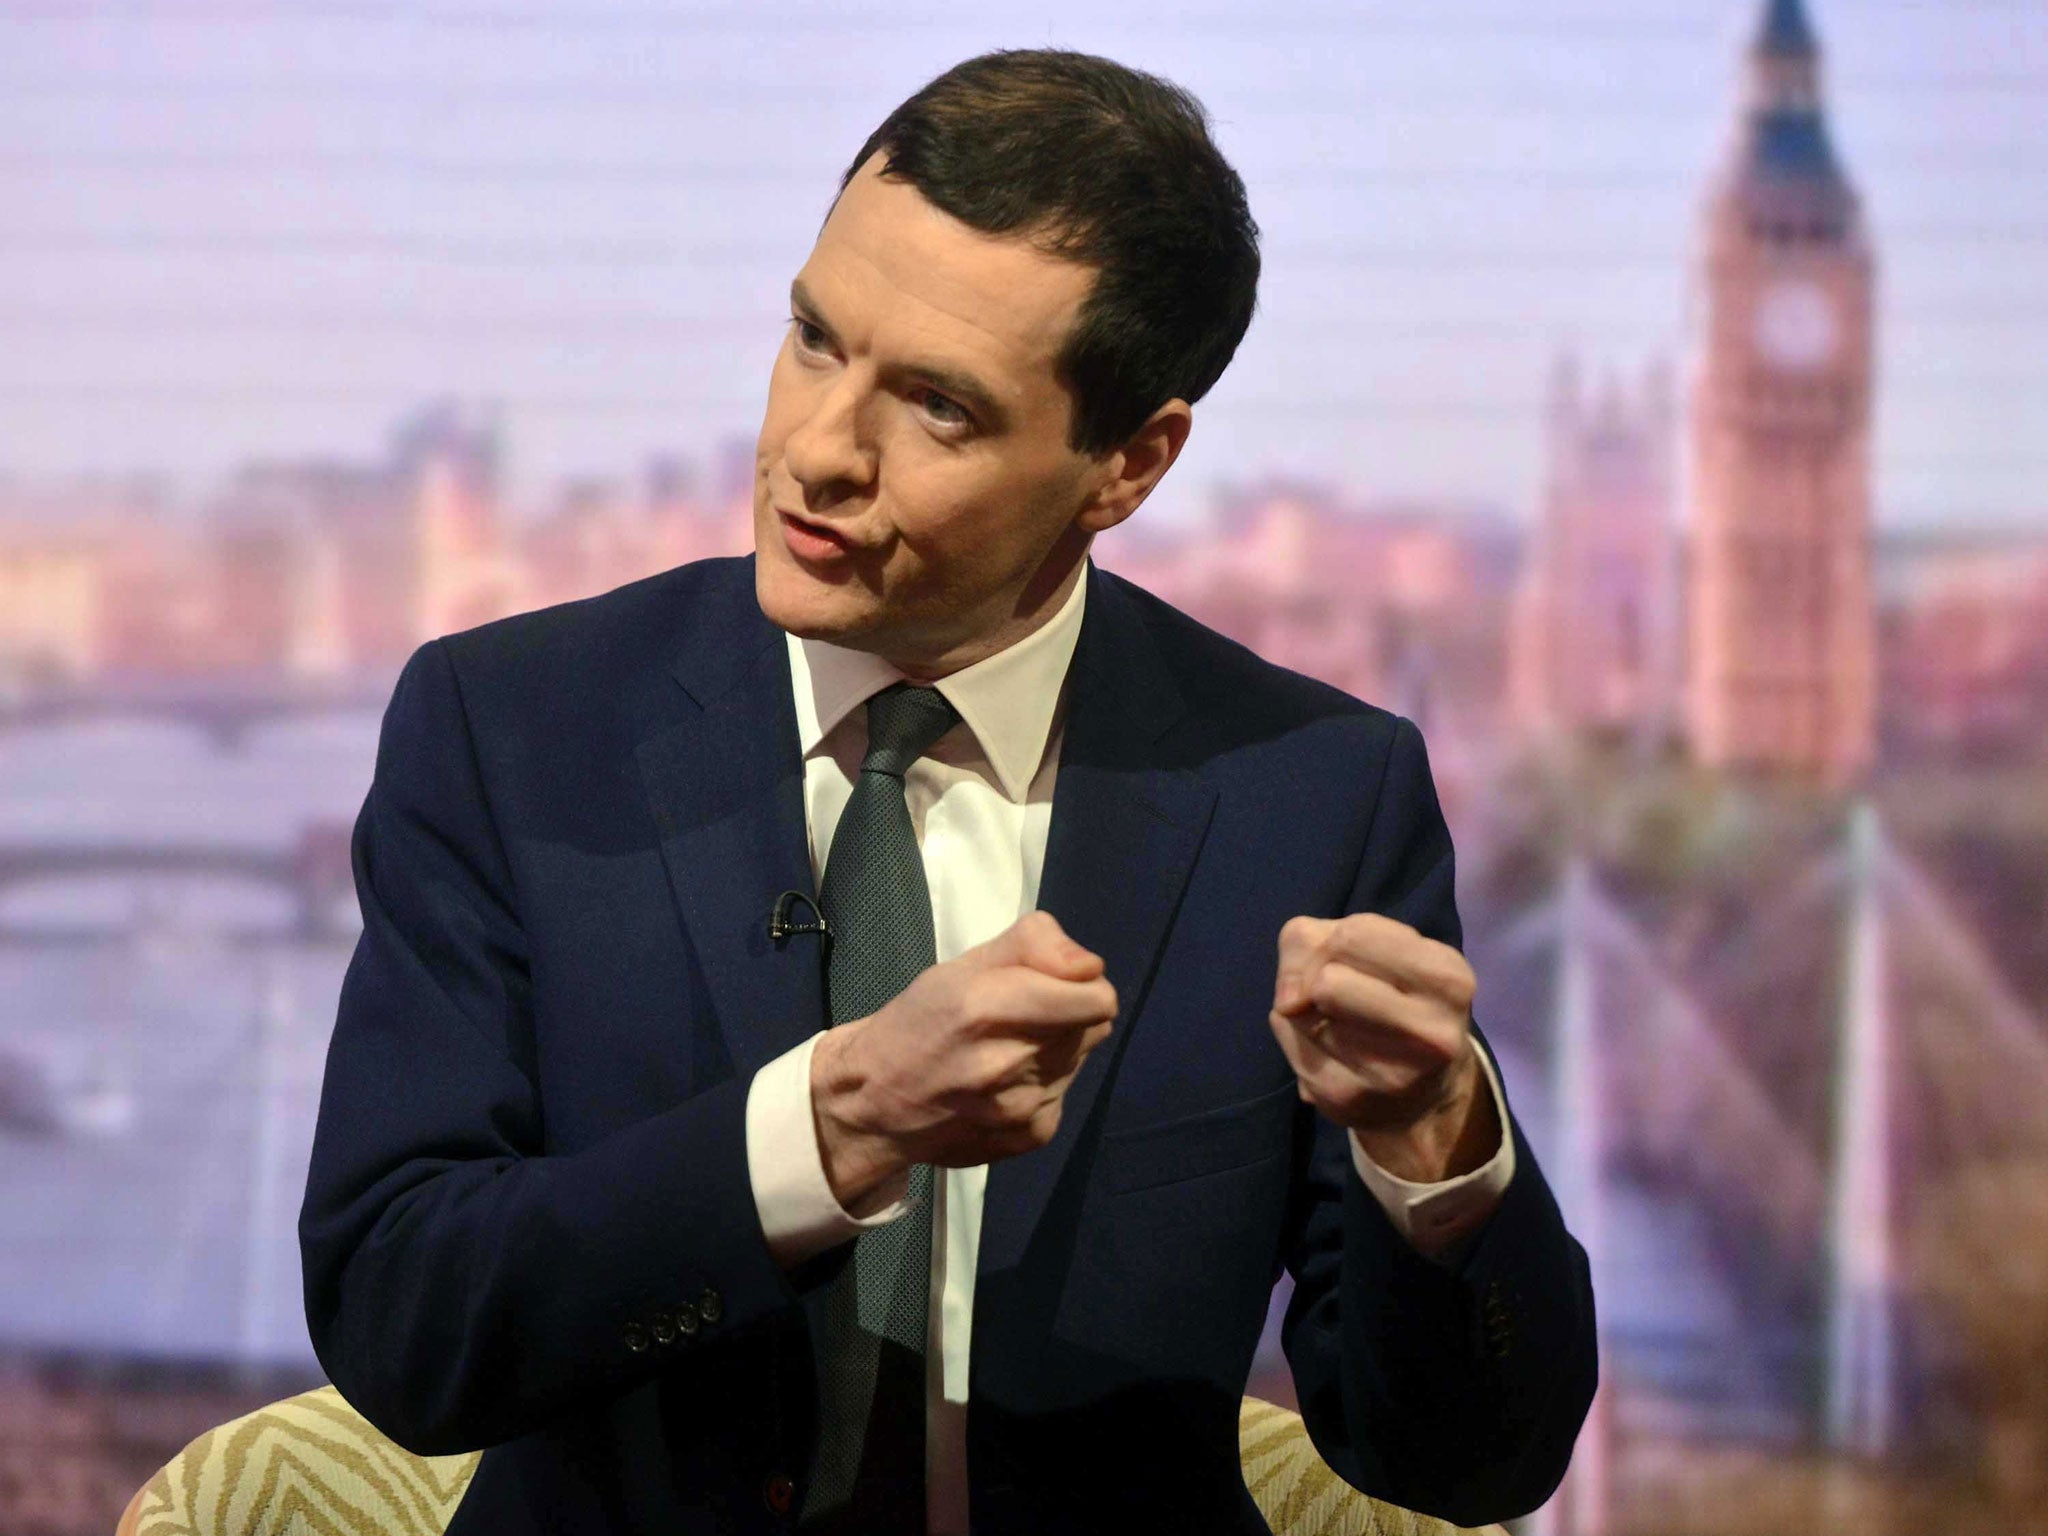 Chancellor of the Exchequer George Osborne appears on The Andrew Marr Show on March 15, 2015